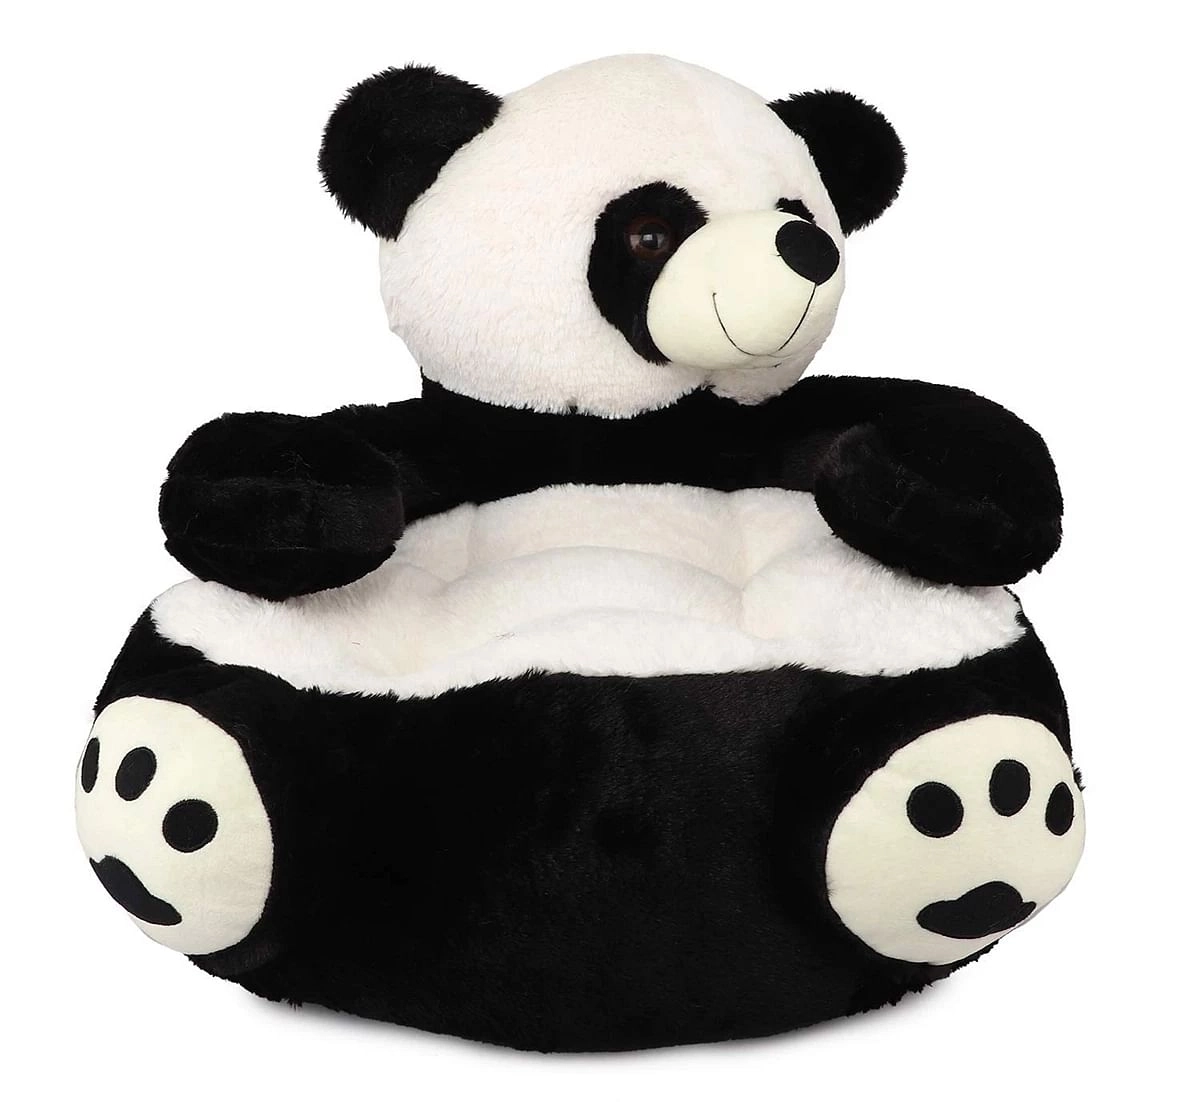 Plush Sitting Panda Armchair With Backrest, Cushion Comfortable Seat by Webby, Soft Toy For Kids (1-3 Years), Multicolor